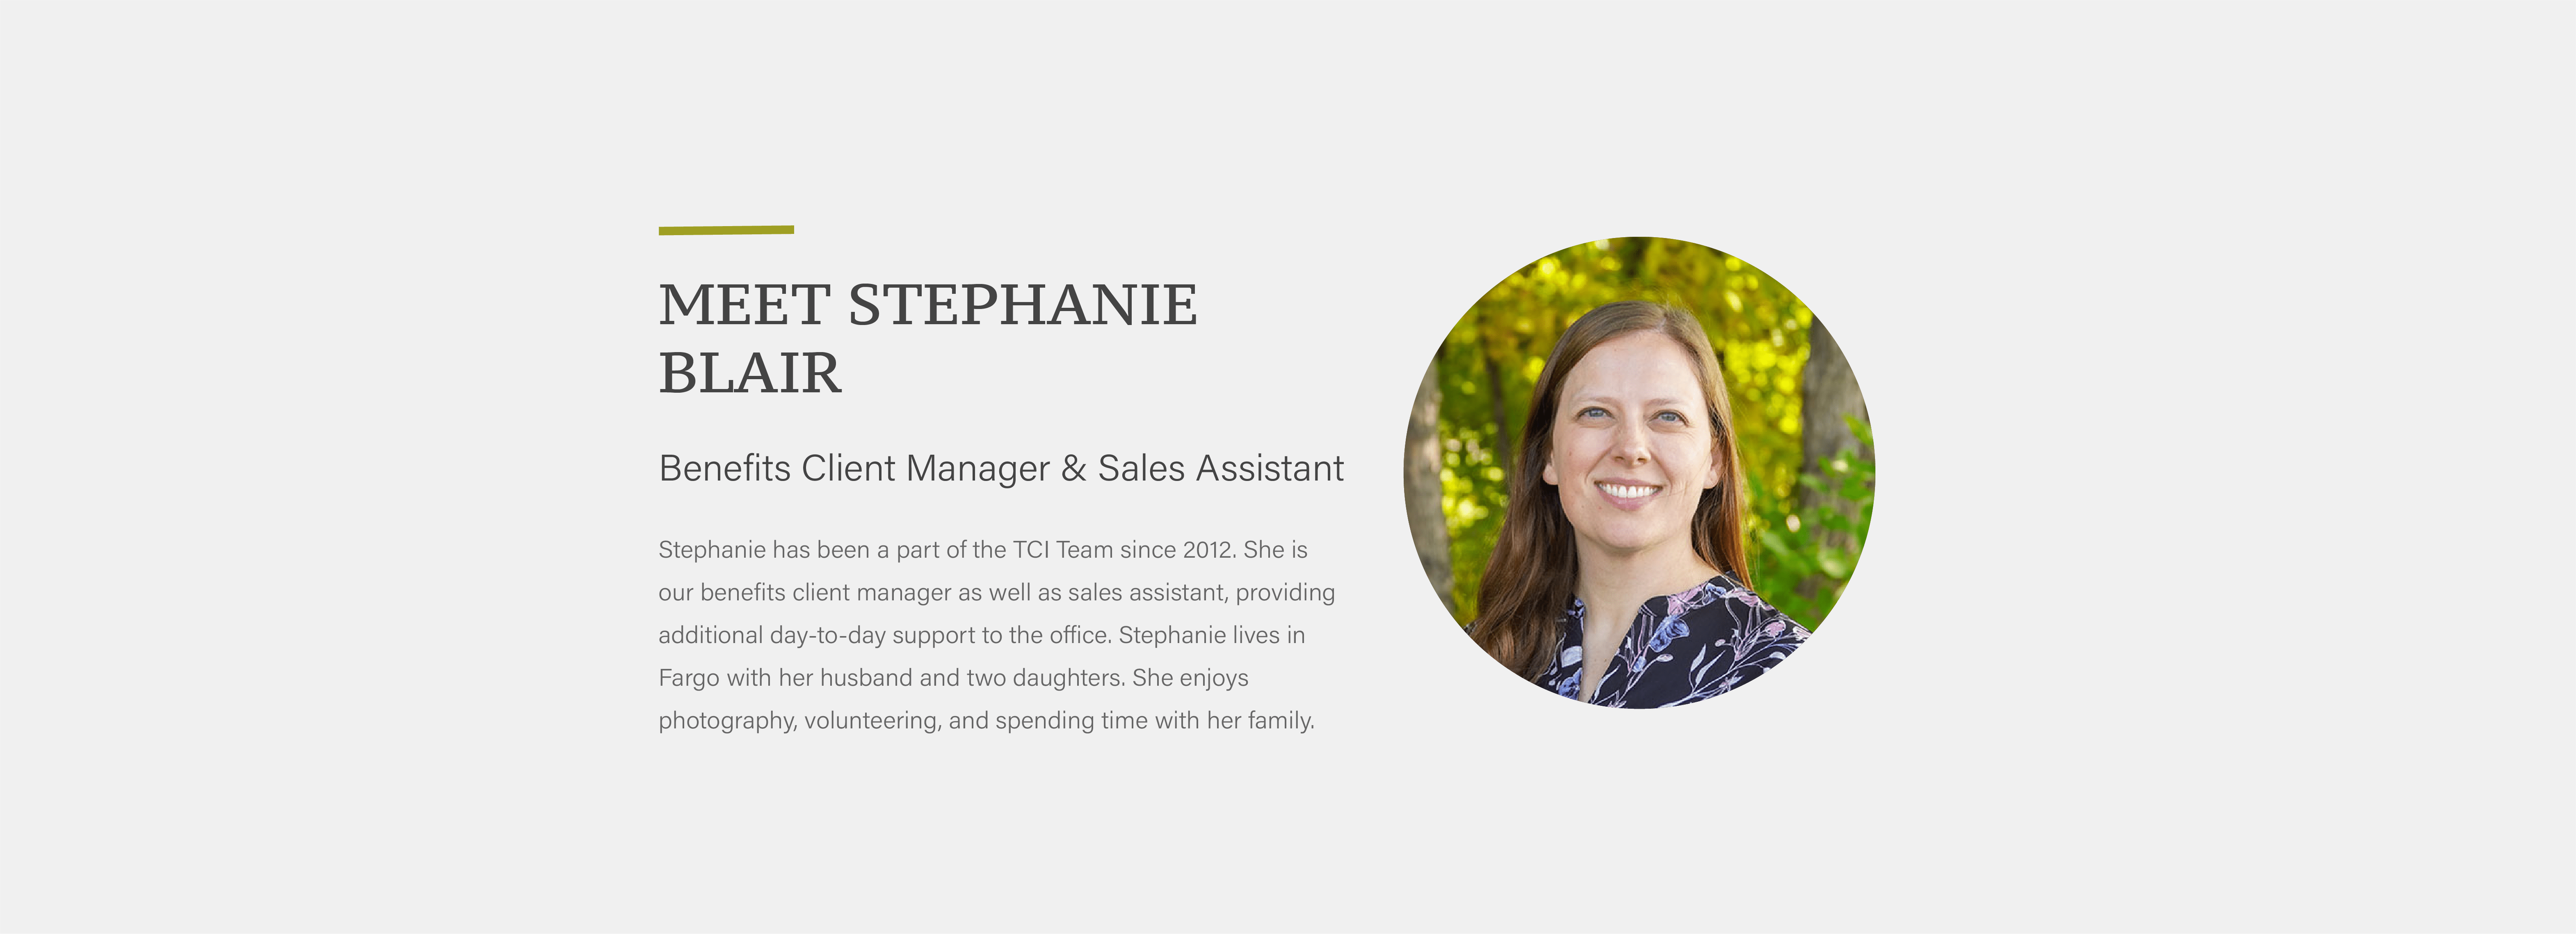 Stephanie has been a part of the TCI Team since 2012. She is our benefits client manager as well as sales assistant, providing additional day-to-day support to the office. Stephanie lives in Fargo with her husband and two daughters. She enjoys photography, volunteering, and spending time with her family.